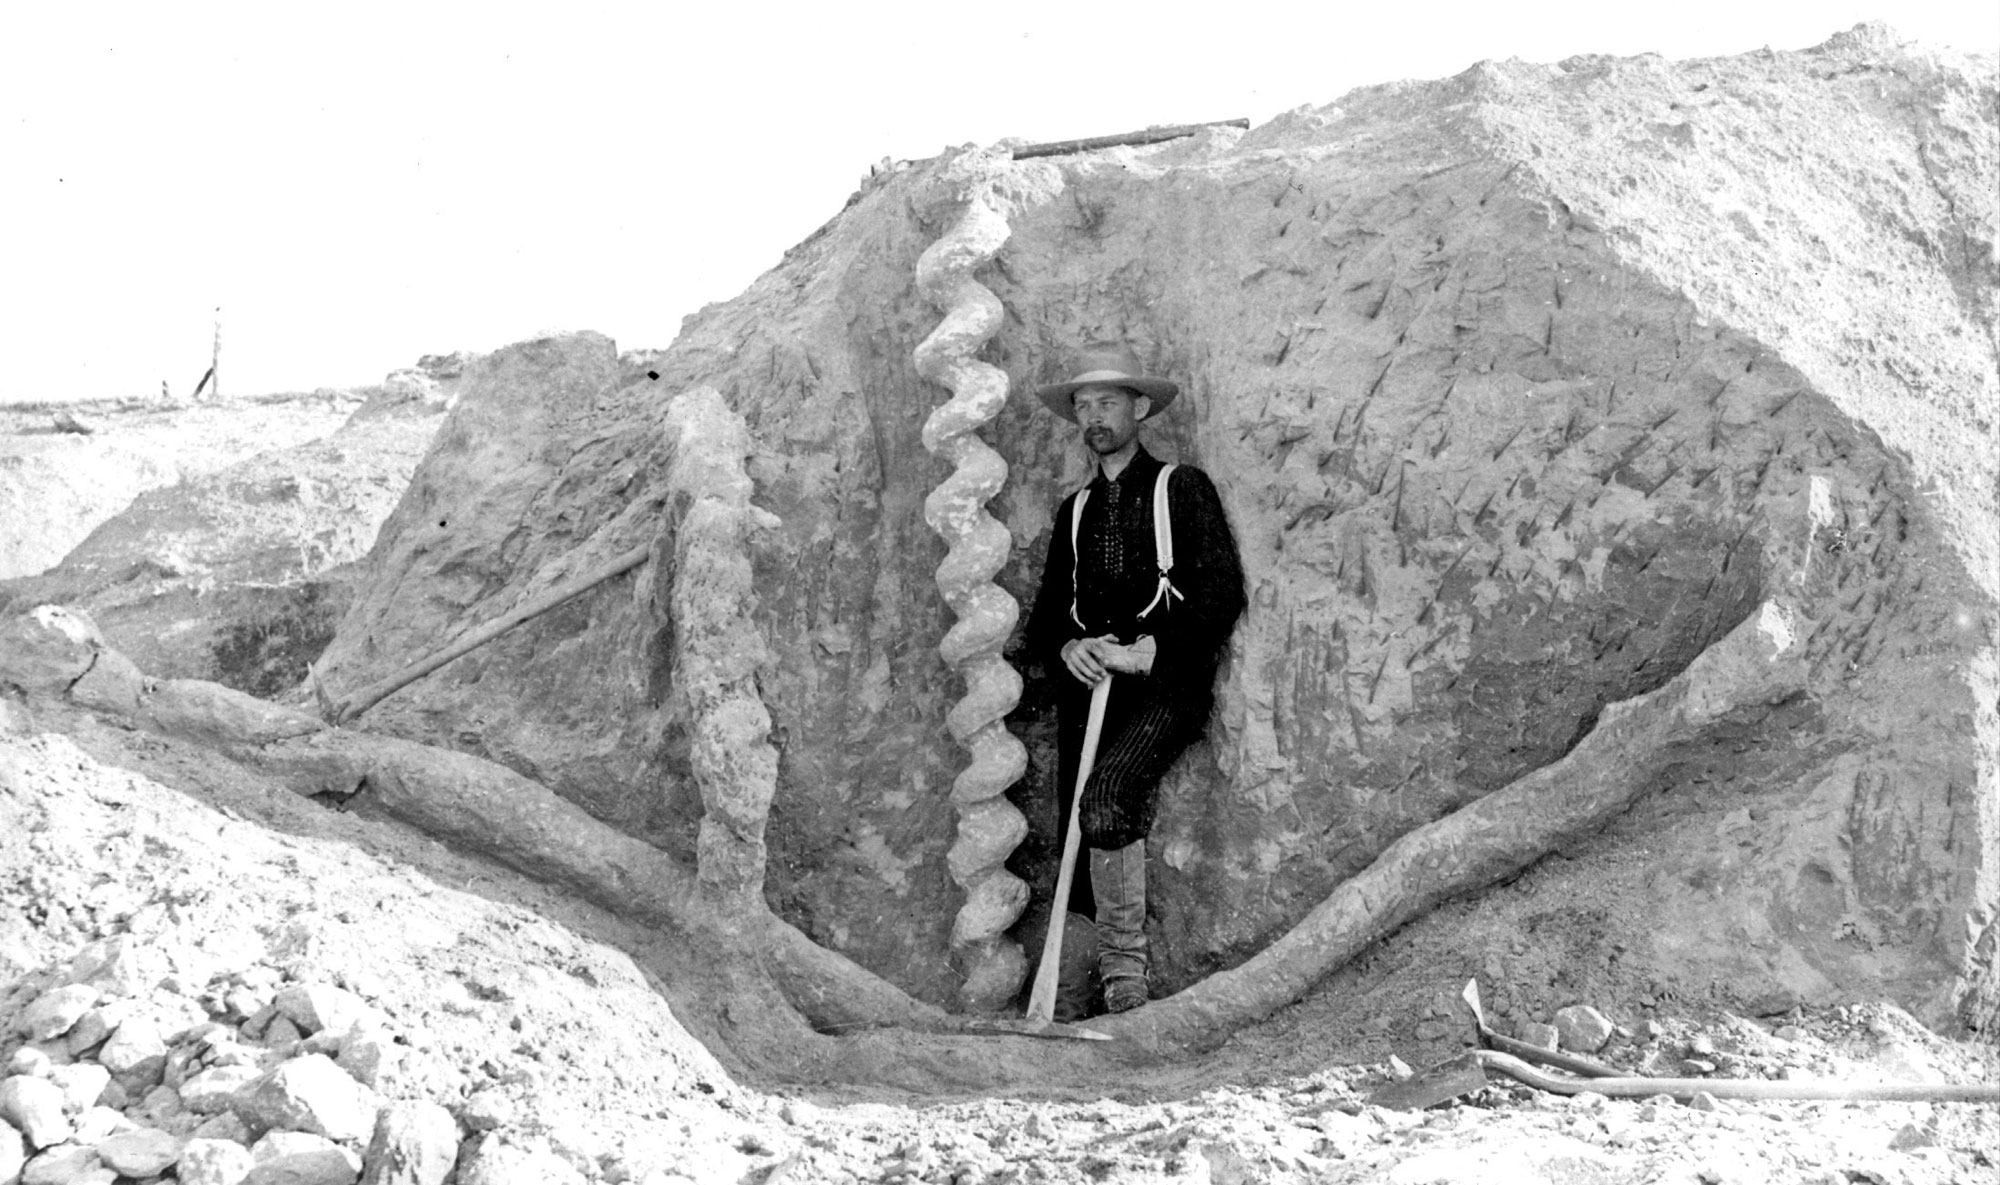 Black and white vintage photograph of a Daemonelix or devil's corkscrew, the burrow of an ancient beaver. The photo shows a man in long-sleeved shirt, long pants, knee-high boots, suspenders, and a broad-brimmed hat holding a pick. The pick and one of the man's foot are resting on the horizontal part of an infilled burrow that has been excavated from a hillside. Next to the man, a corkscrew-like burrow extends to the surface of the excavated hill. Other branches of the burrow complex can also be seen.